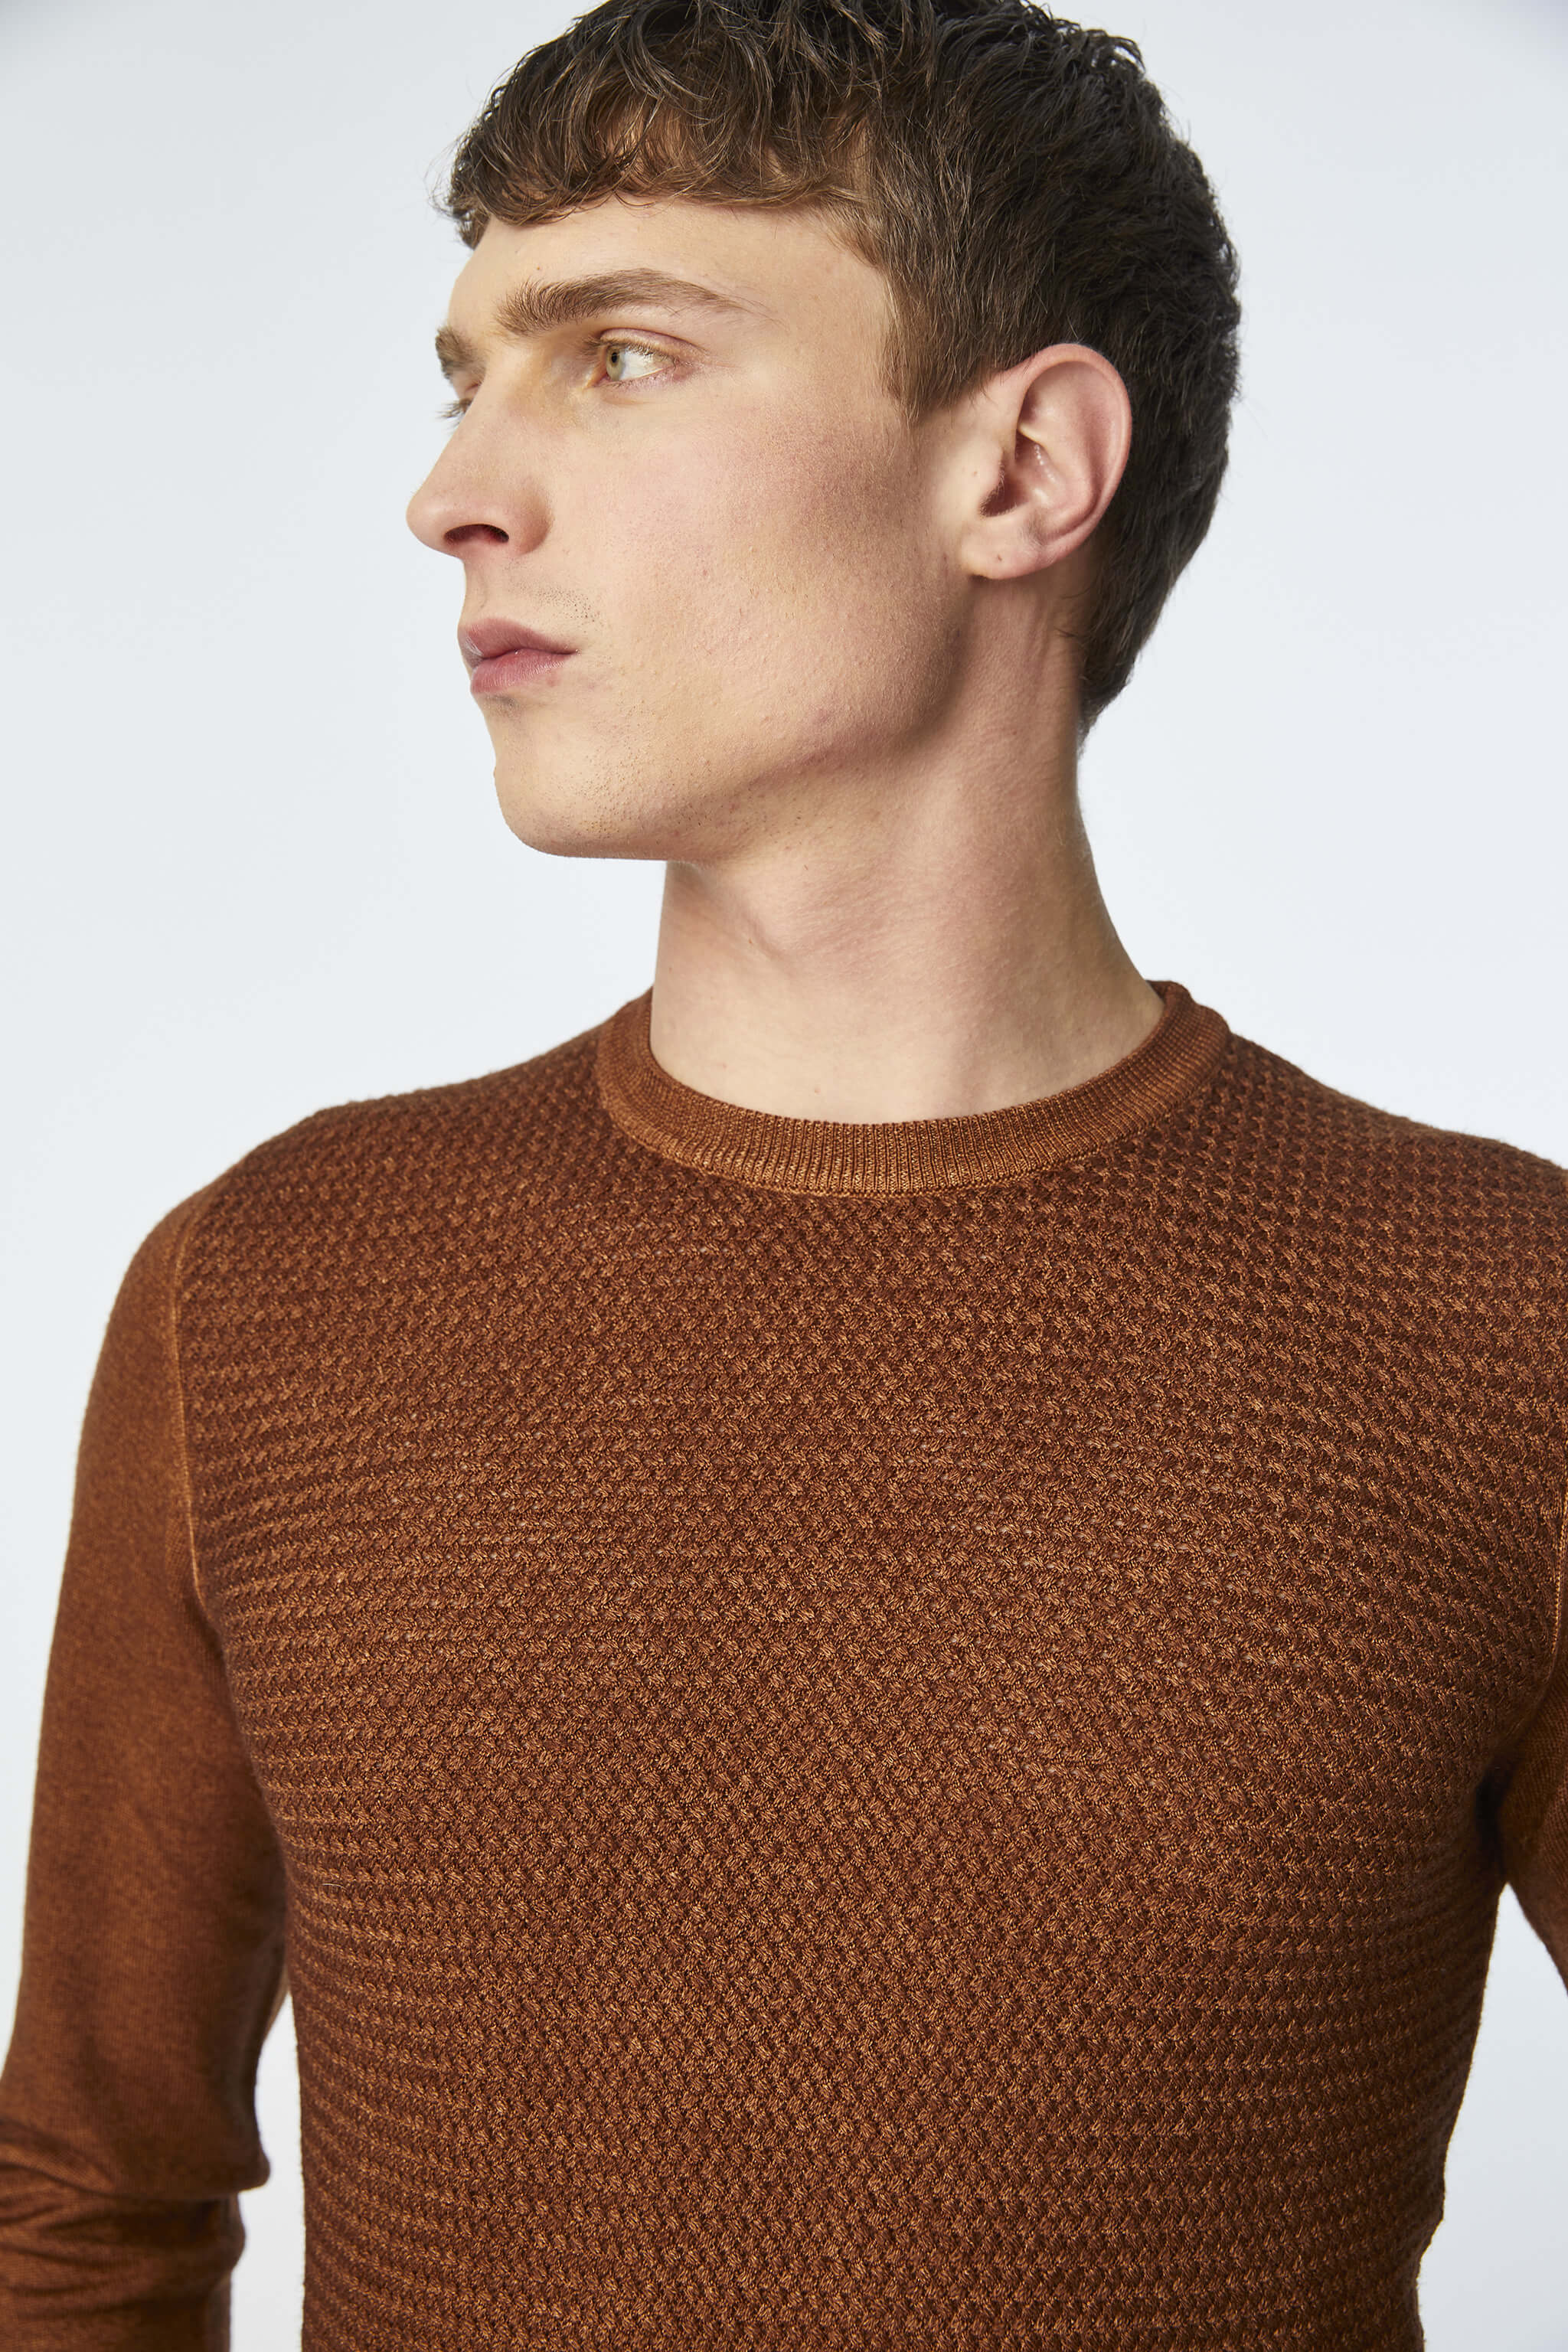 Garment-dyed crewneck in brown